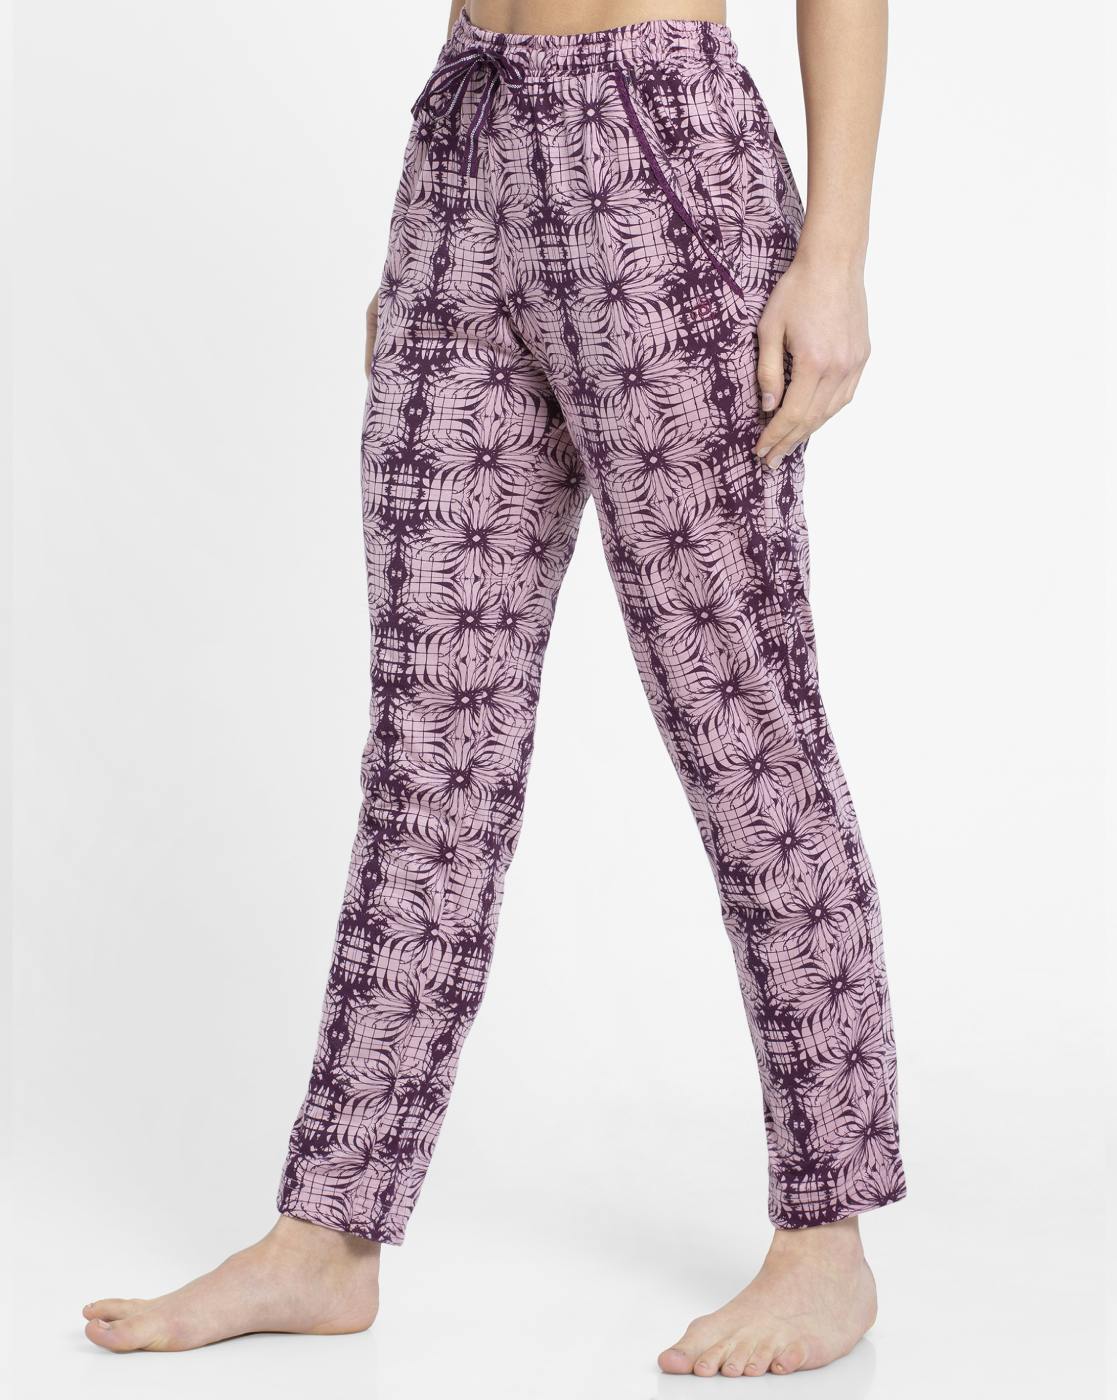 Large Jockey Peach Blossom Print60B Knit Lounge Pants at Rs 799/piece in  Chikmagalur